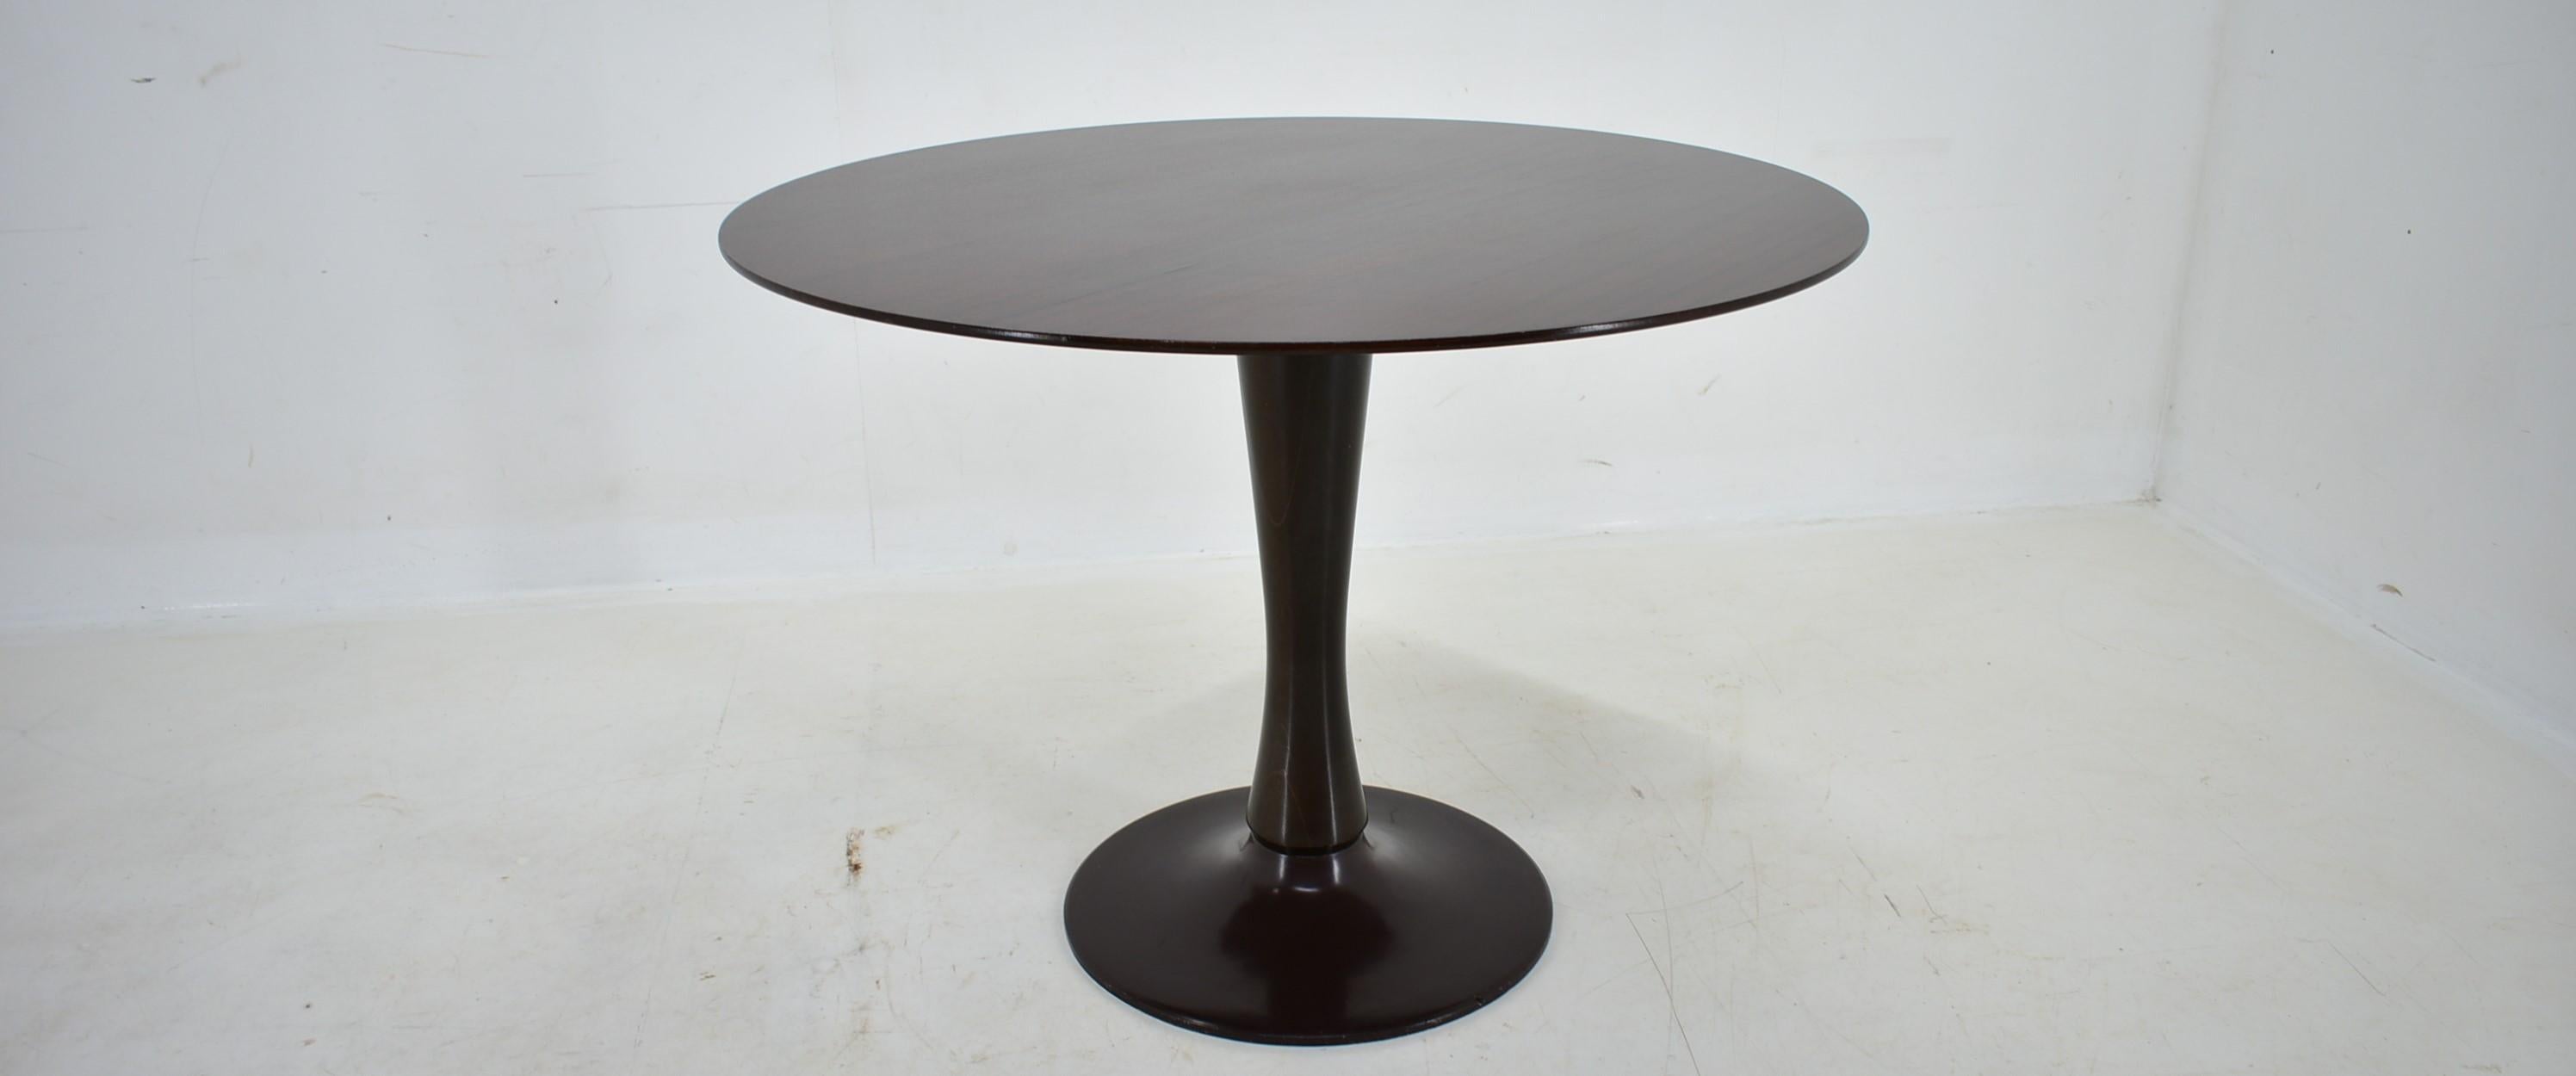 - Made in Czechoslovakia
- Made of beech, veneer, cast iron
- The table is Stabil
- Cleaned
- good original condition